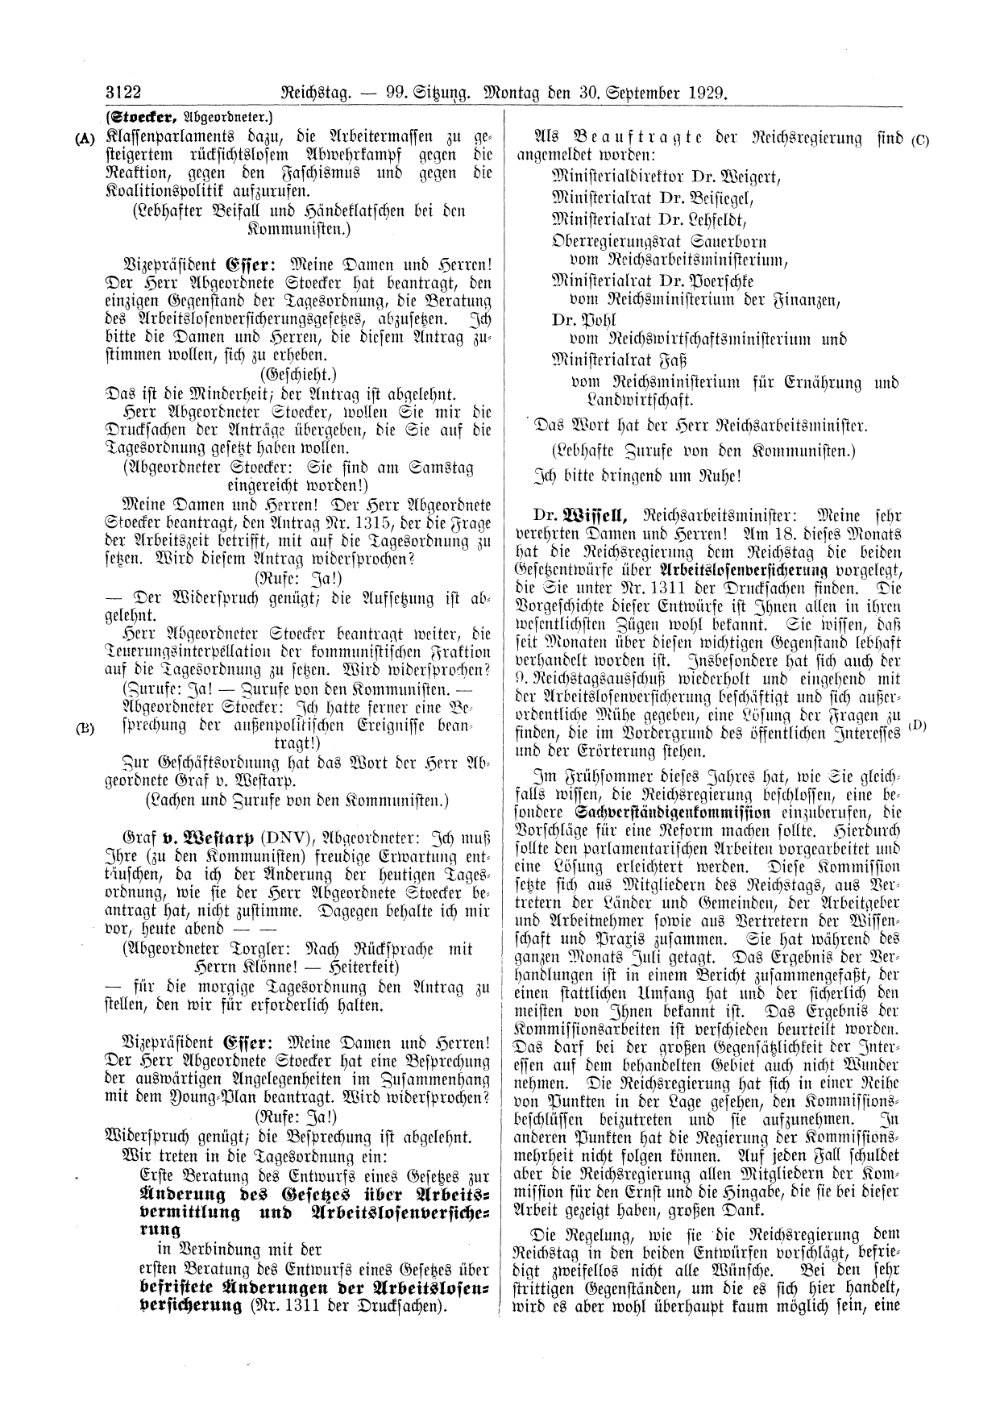 Scan of page 3122